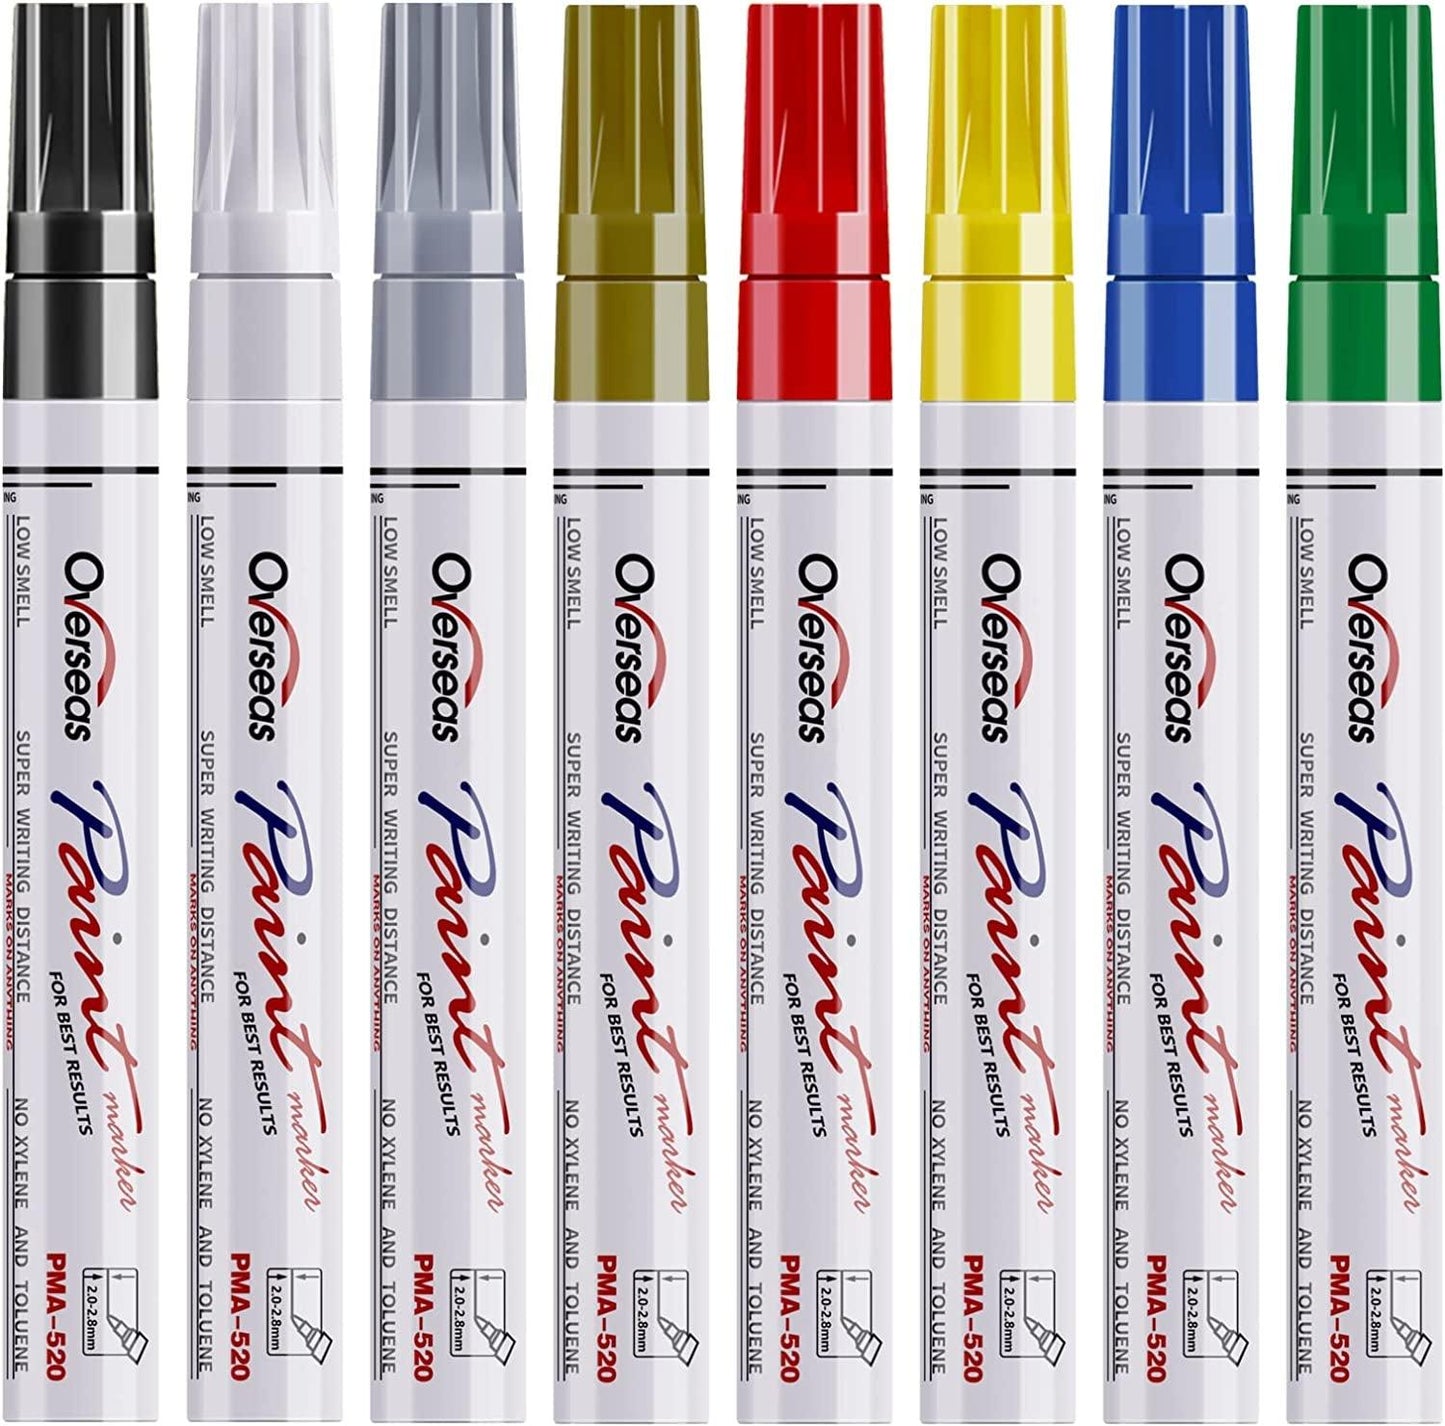 Paint Pens Paint Markers, 14 Pack Permanent Oil Based Markers, Medium Tip,  5 Colors, Never Fade